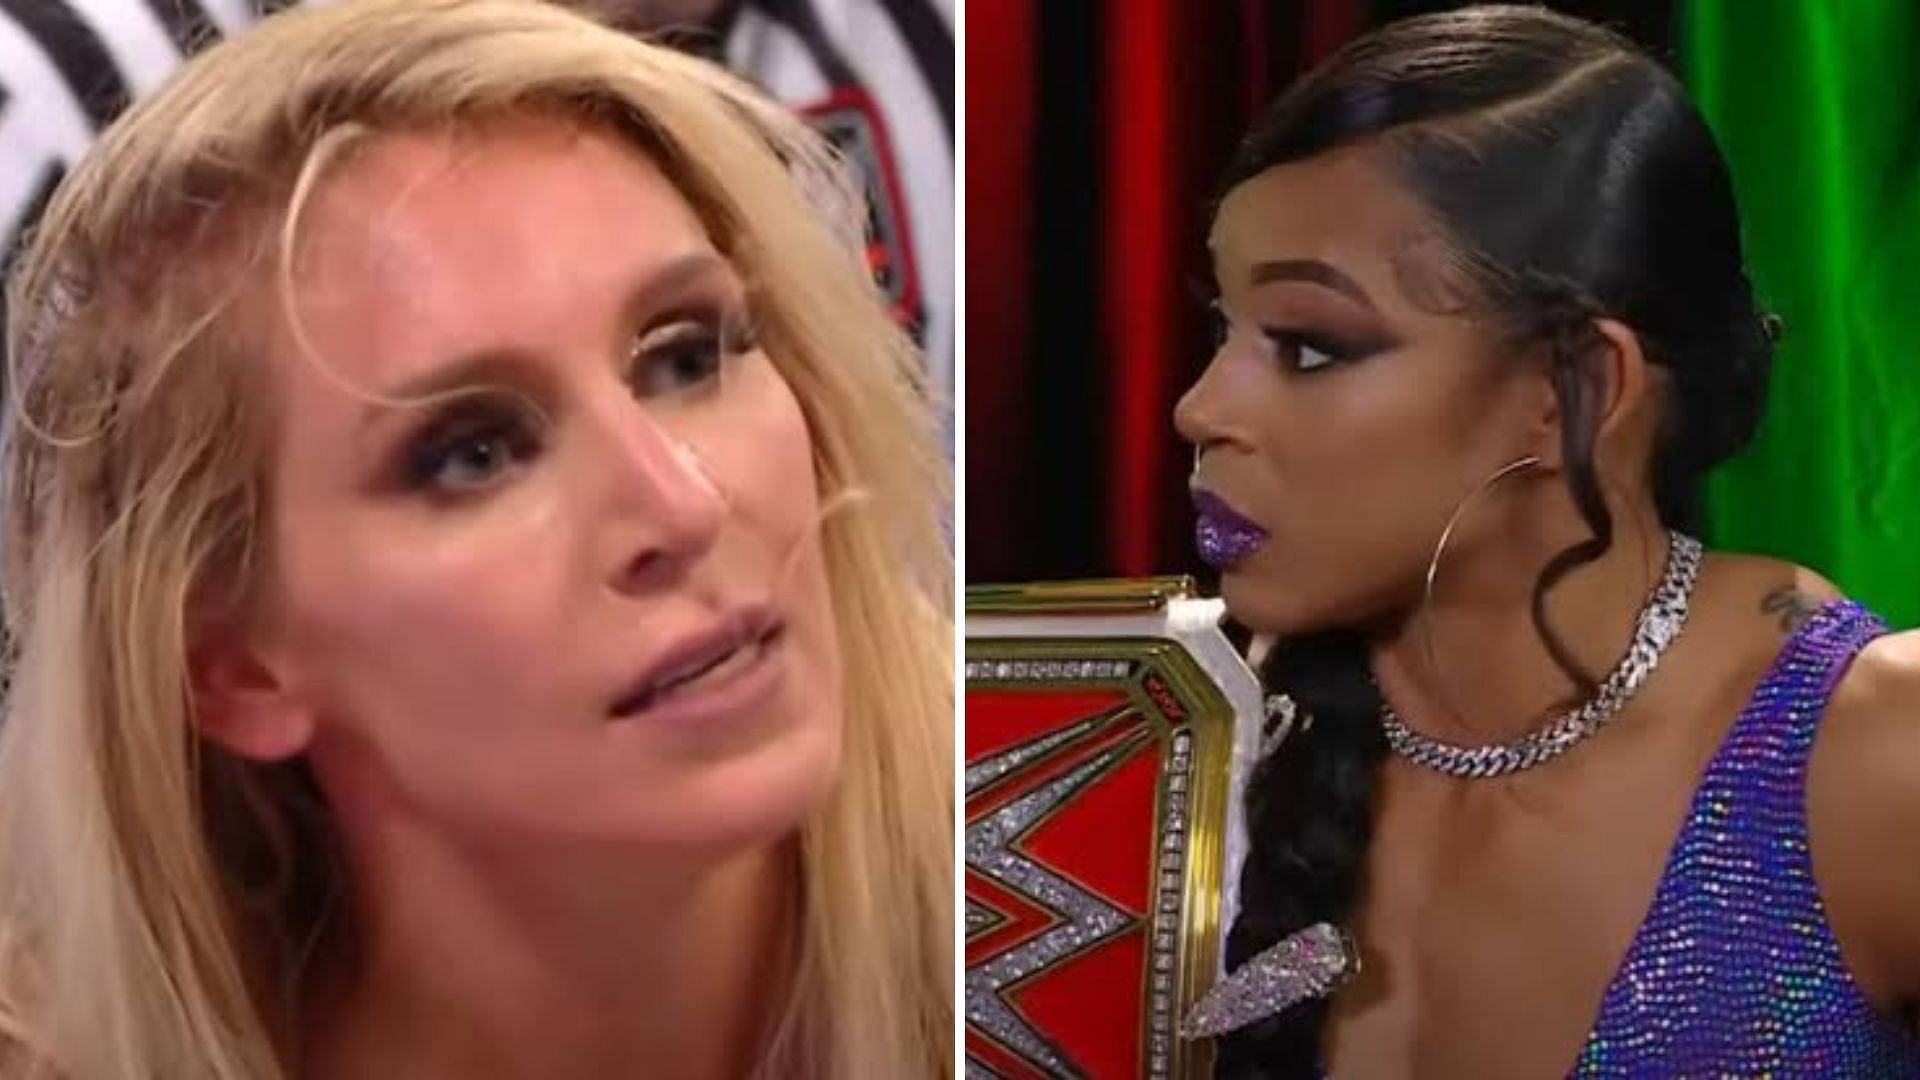 Charlotte and Belair are two of WWE